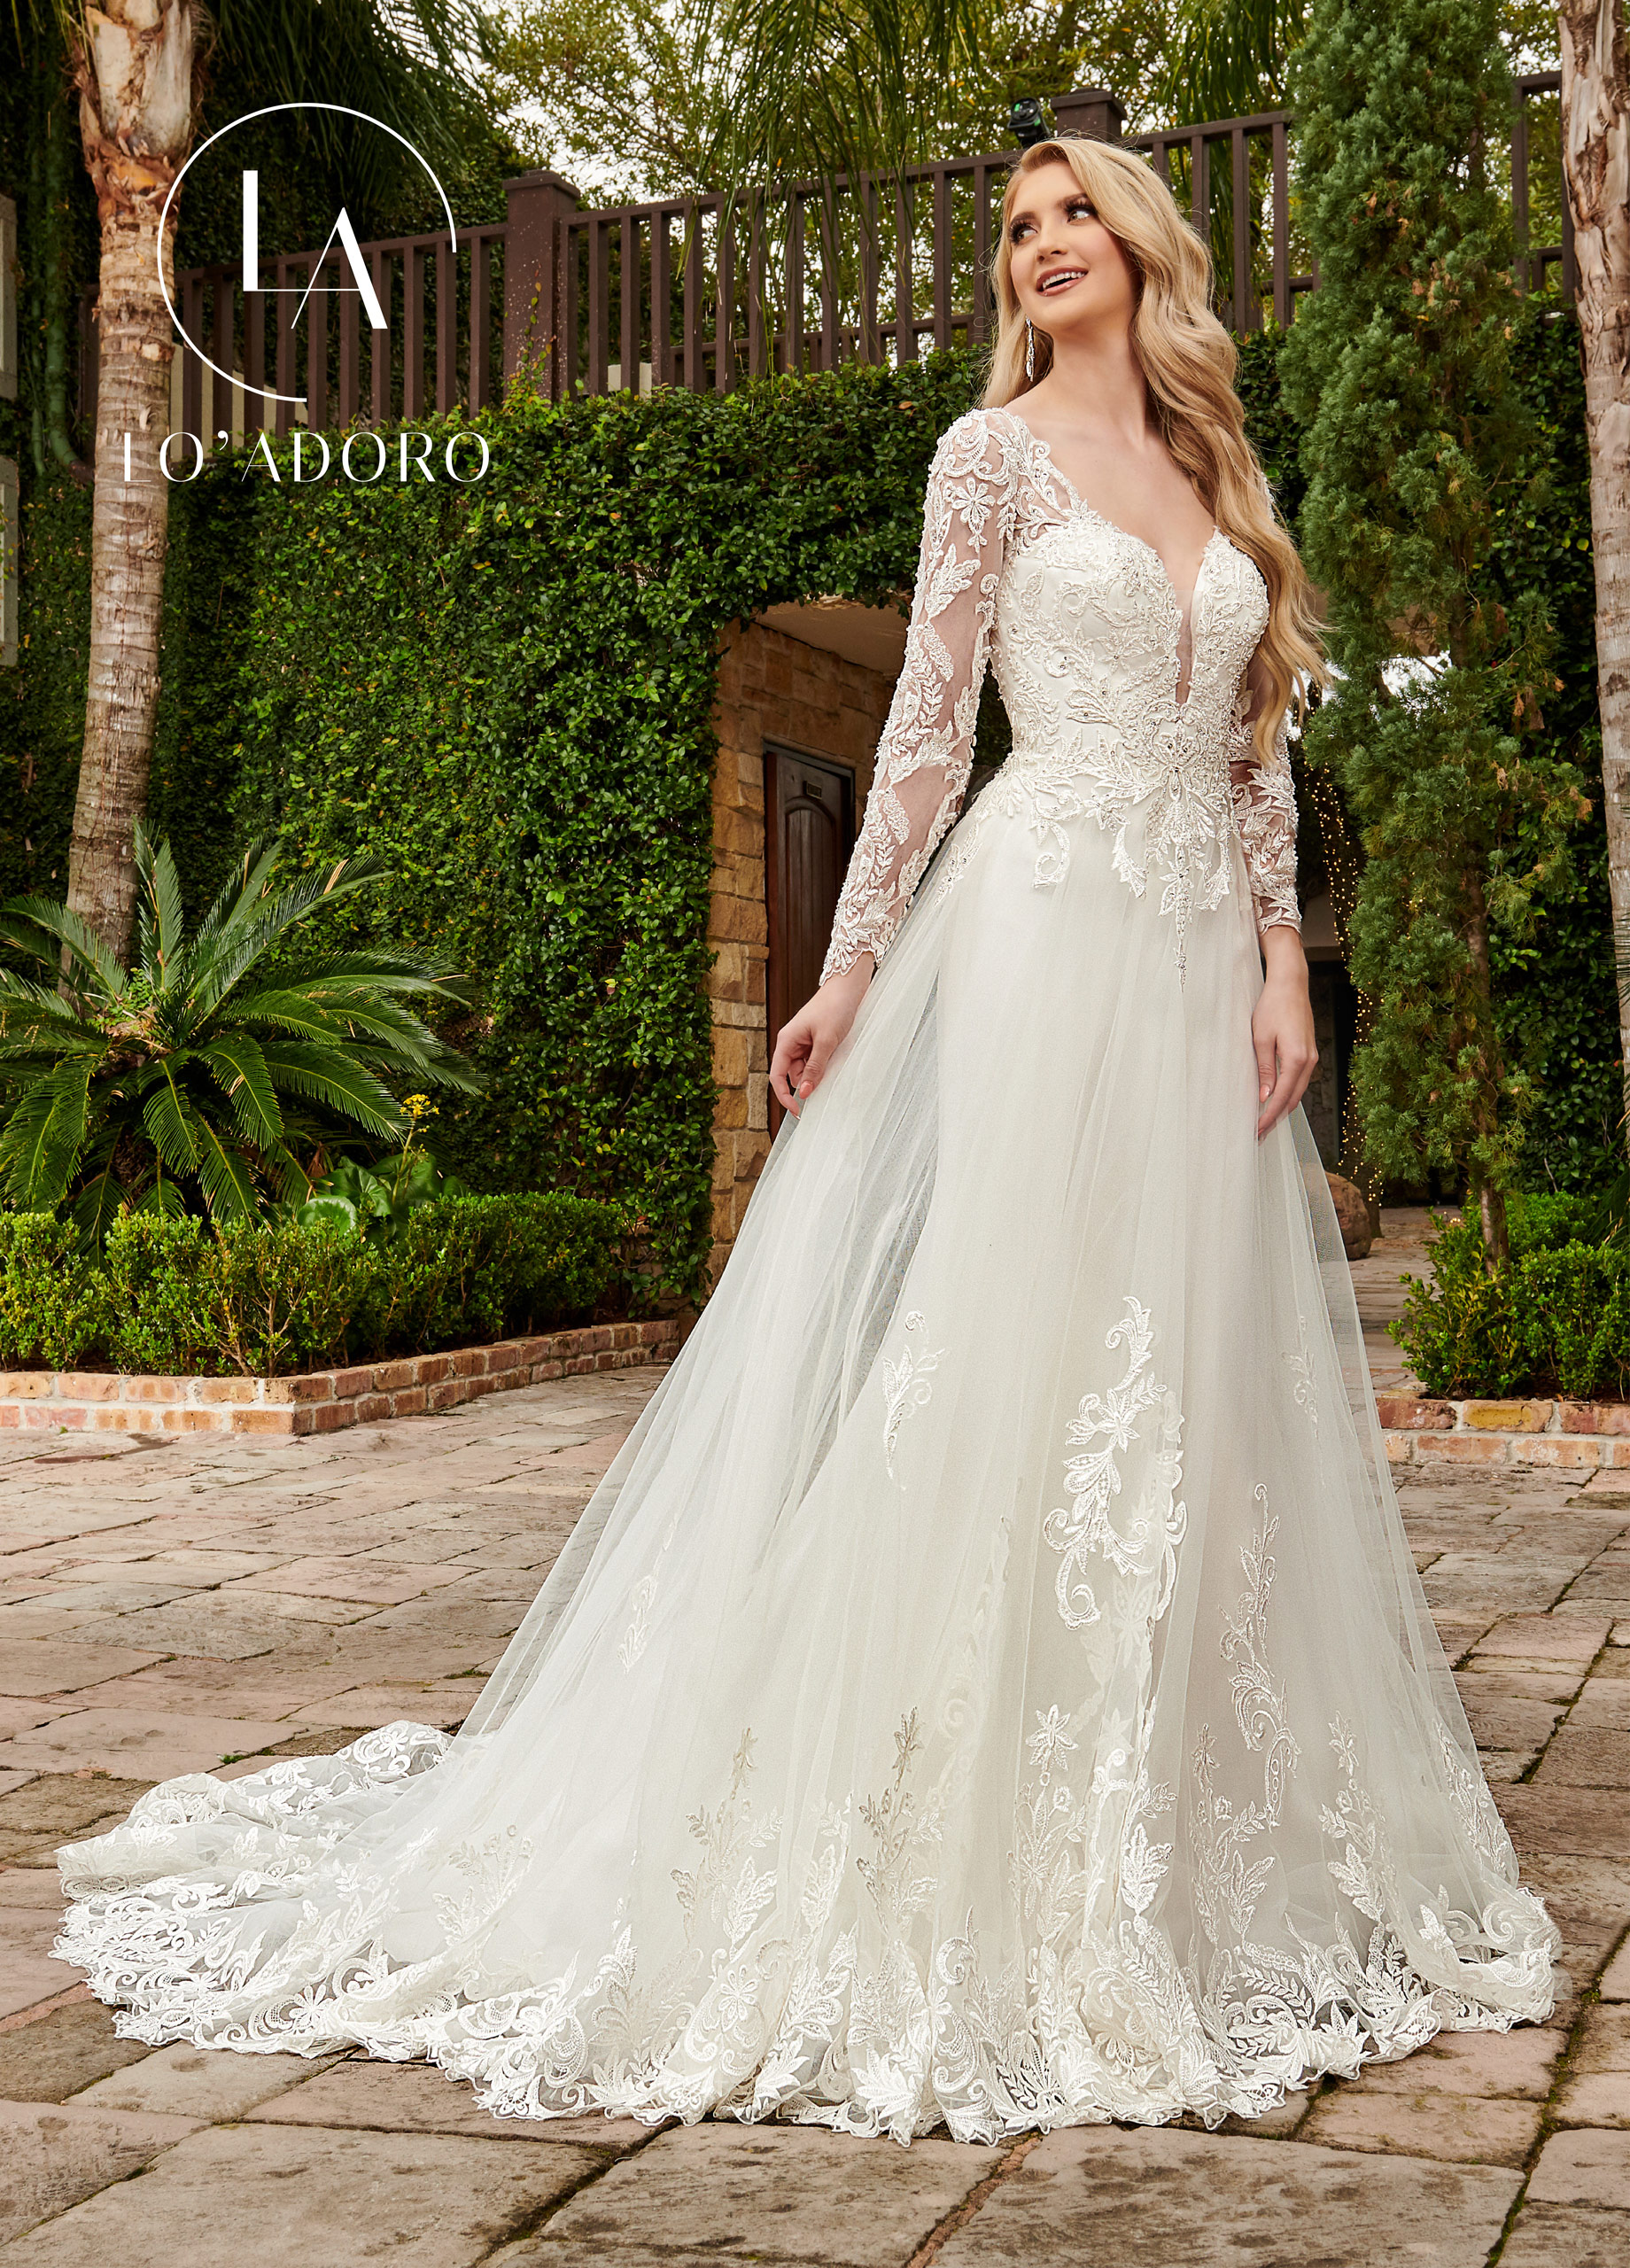 V-Neck Fit & Flare Lo' Adoro Bridal in Ivory,White Color